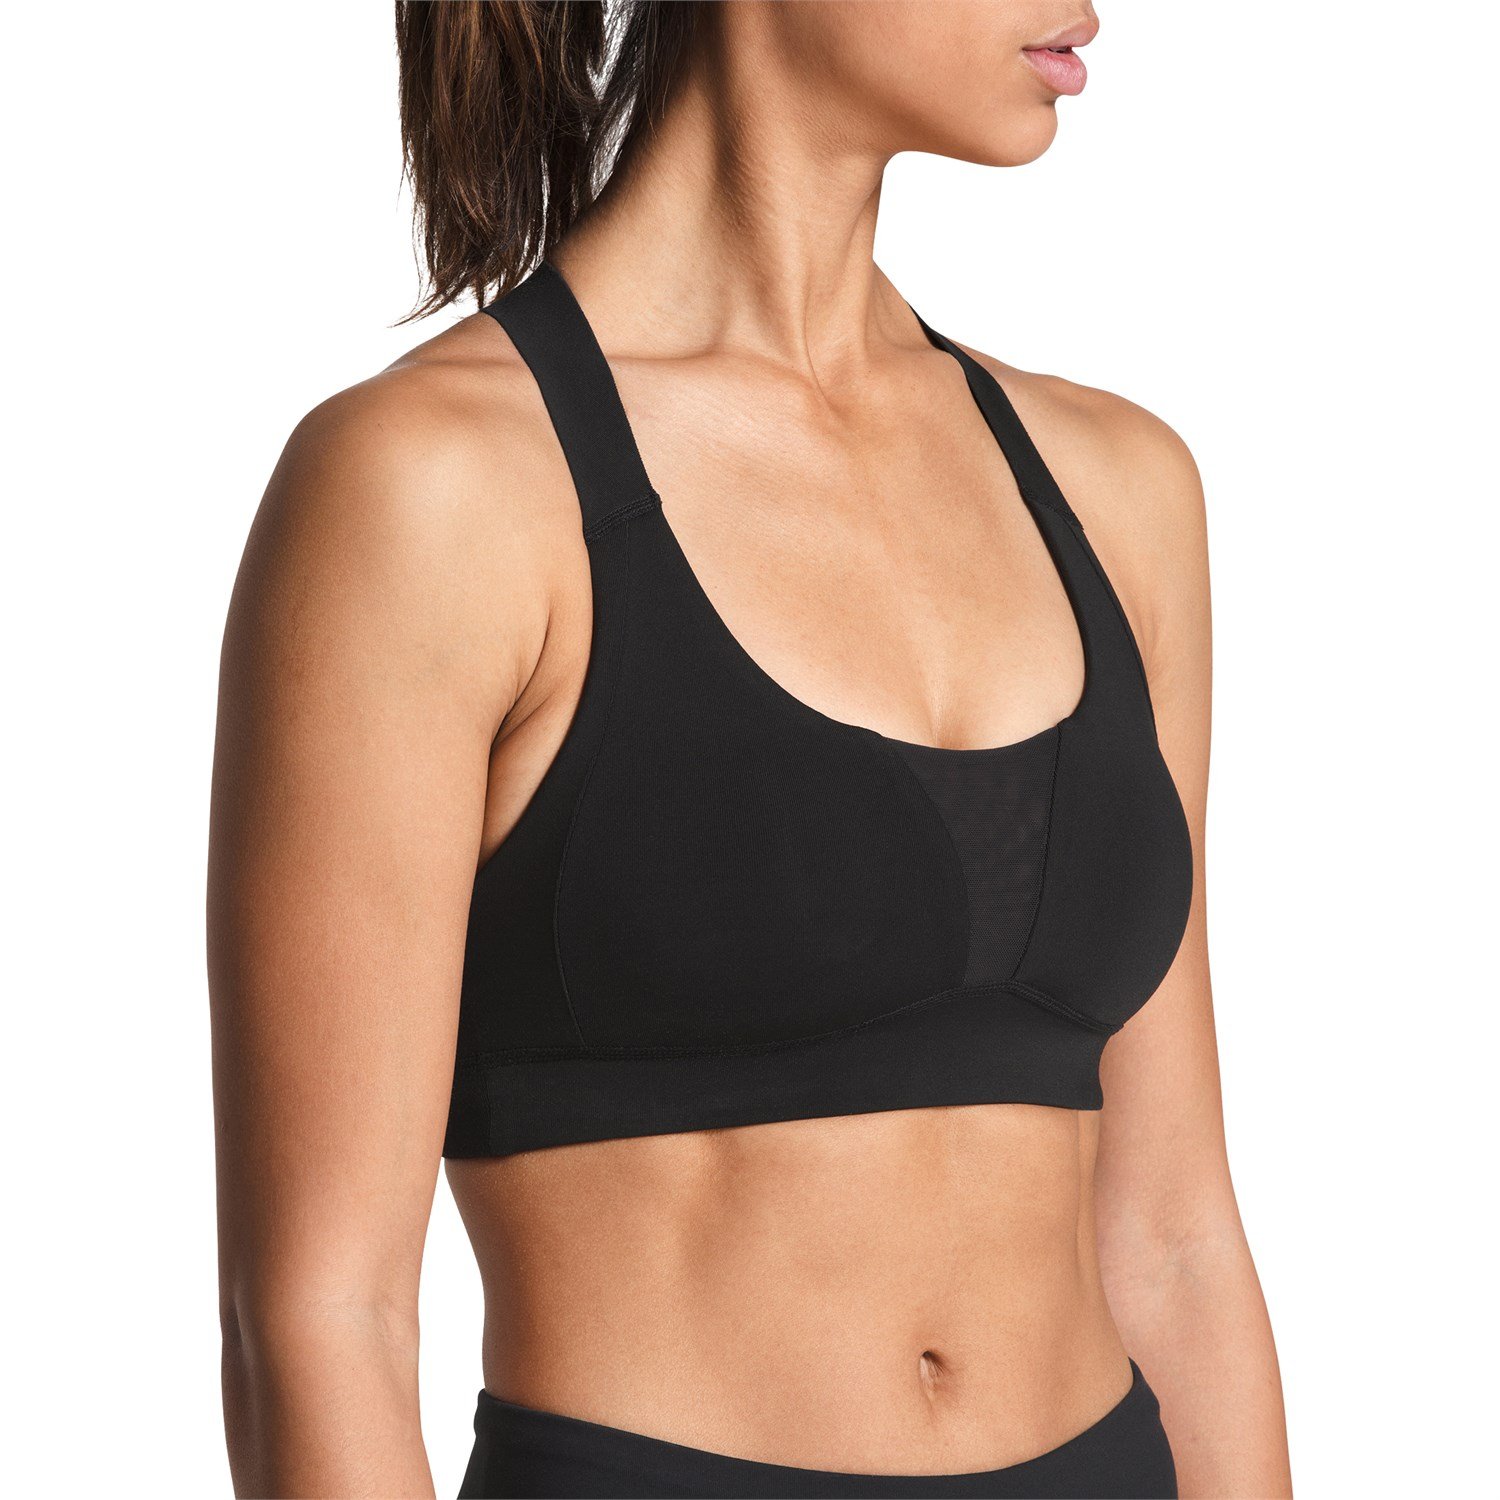 The North Face Active Sports Bras